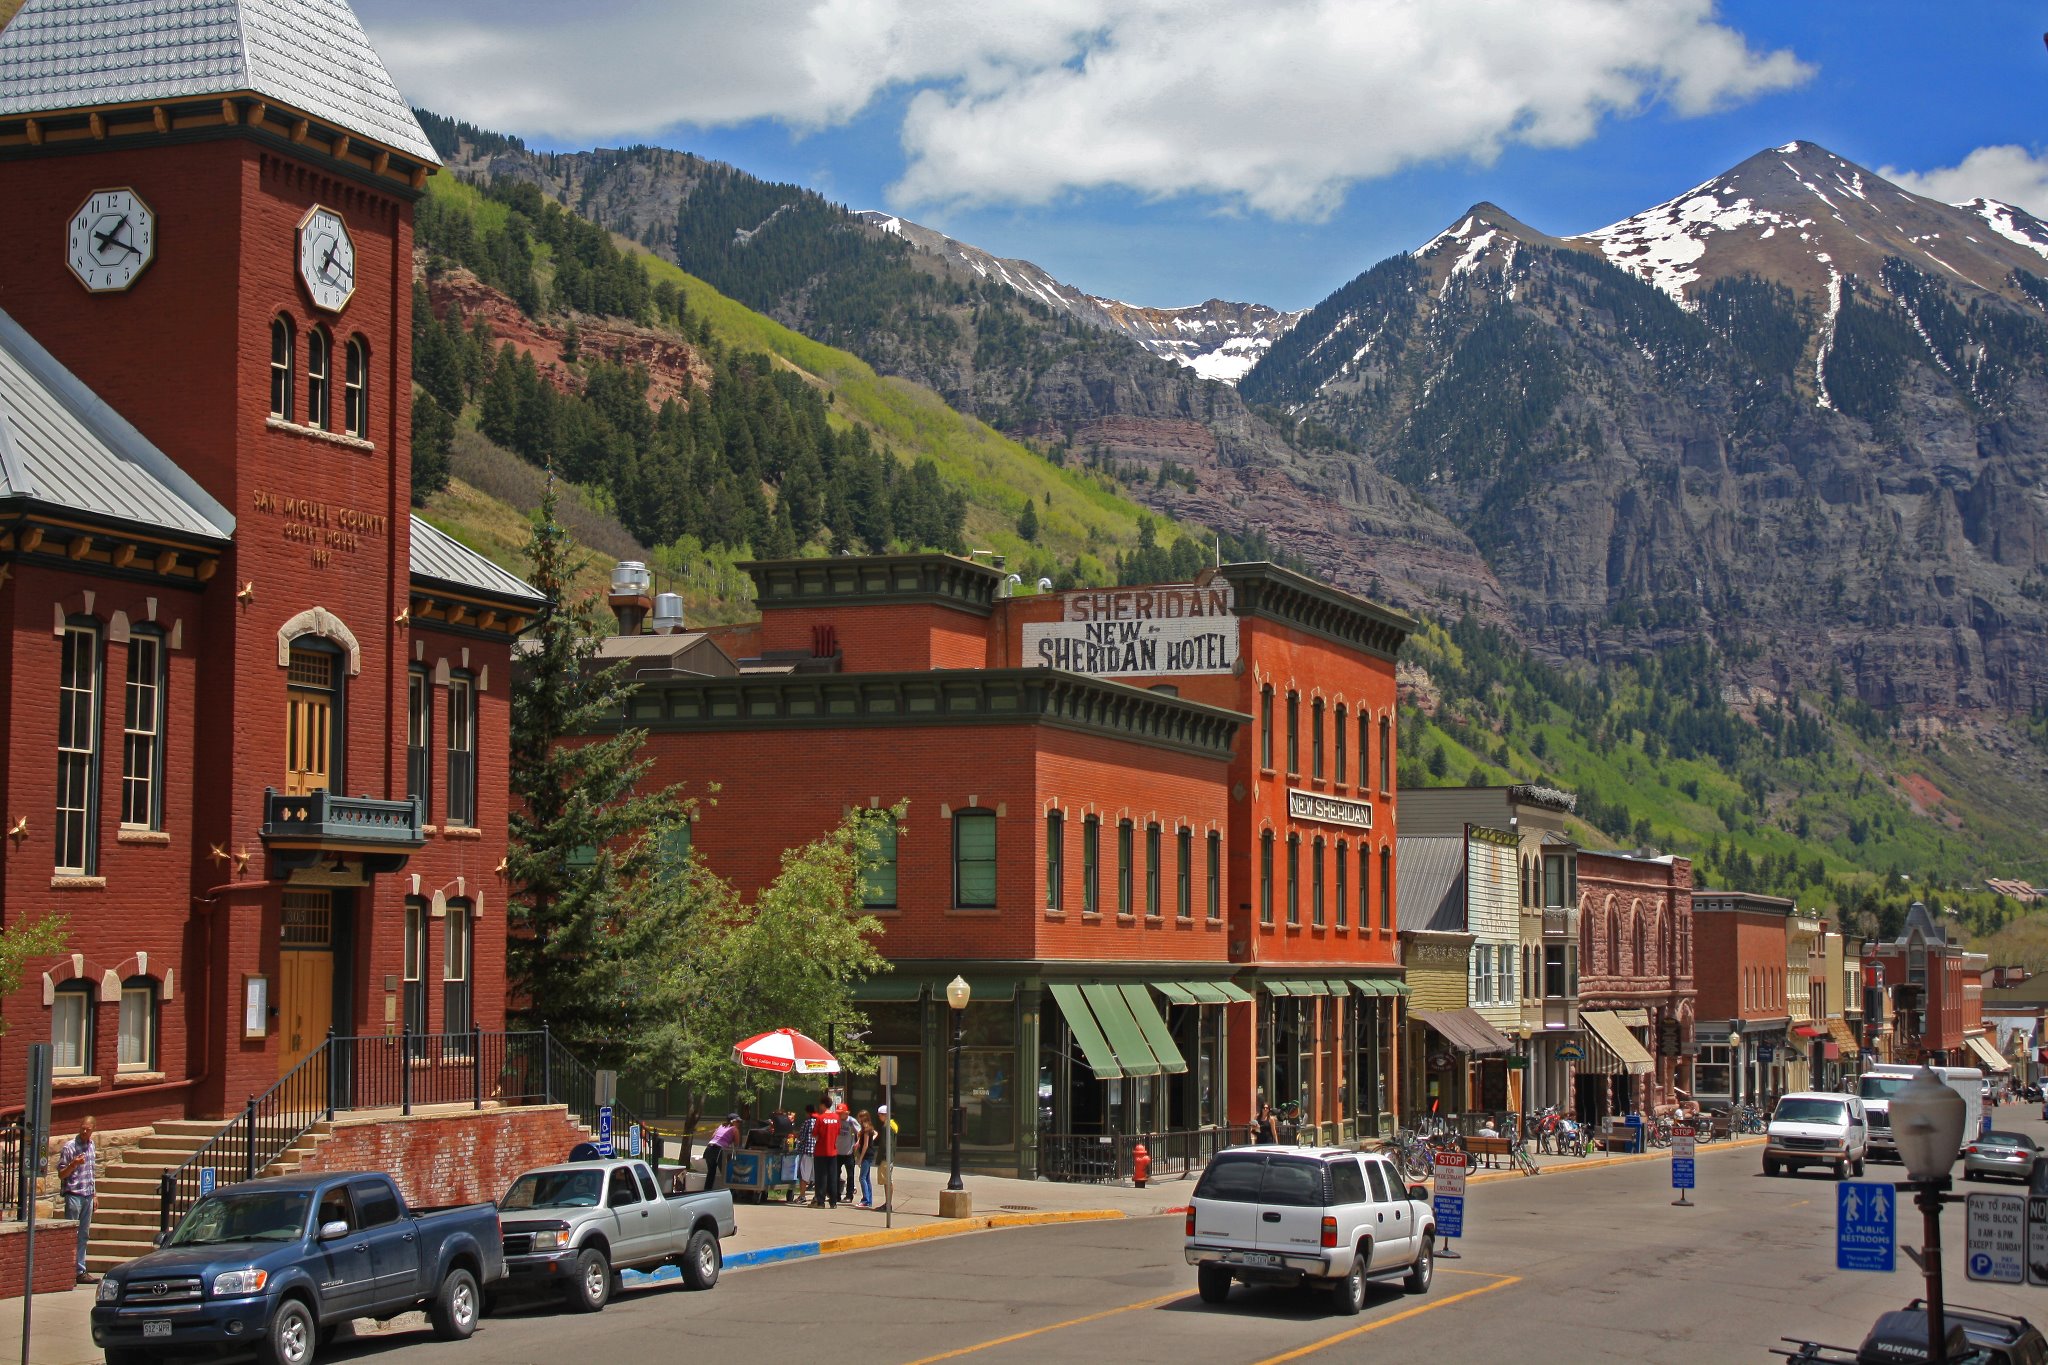 Colorado Is Home to Some of America’s Most Spectacular Mountain Towns - Snow Addiction - News ...